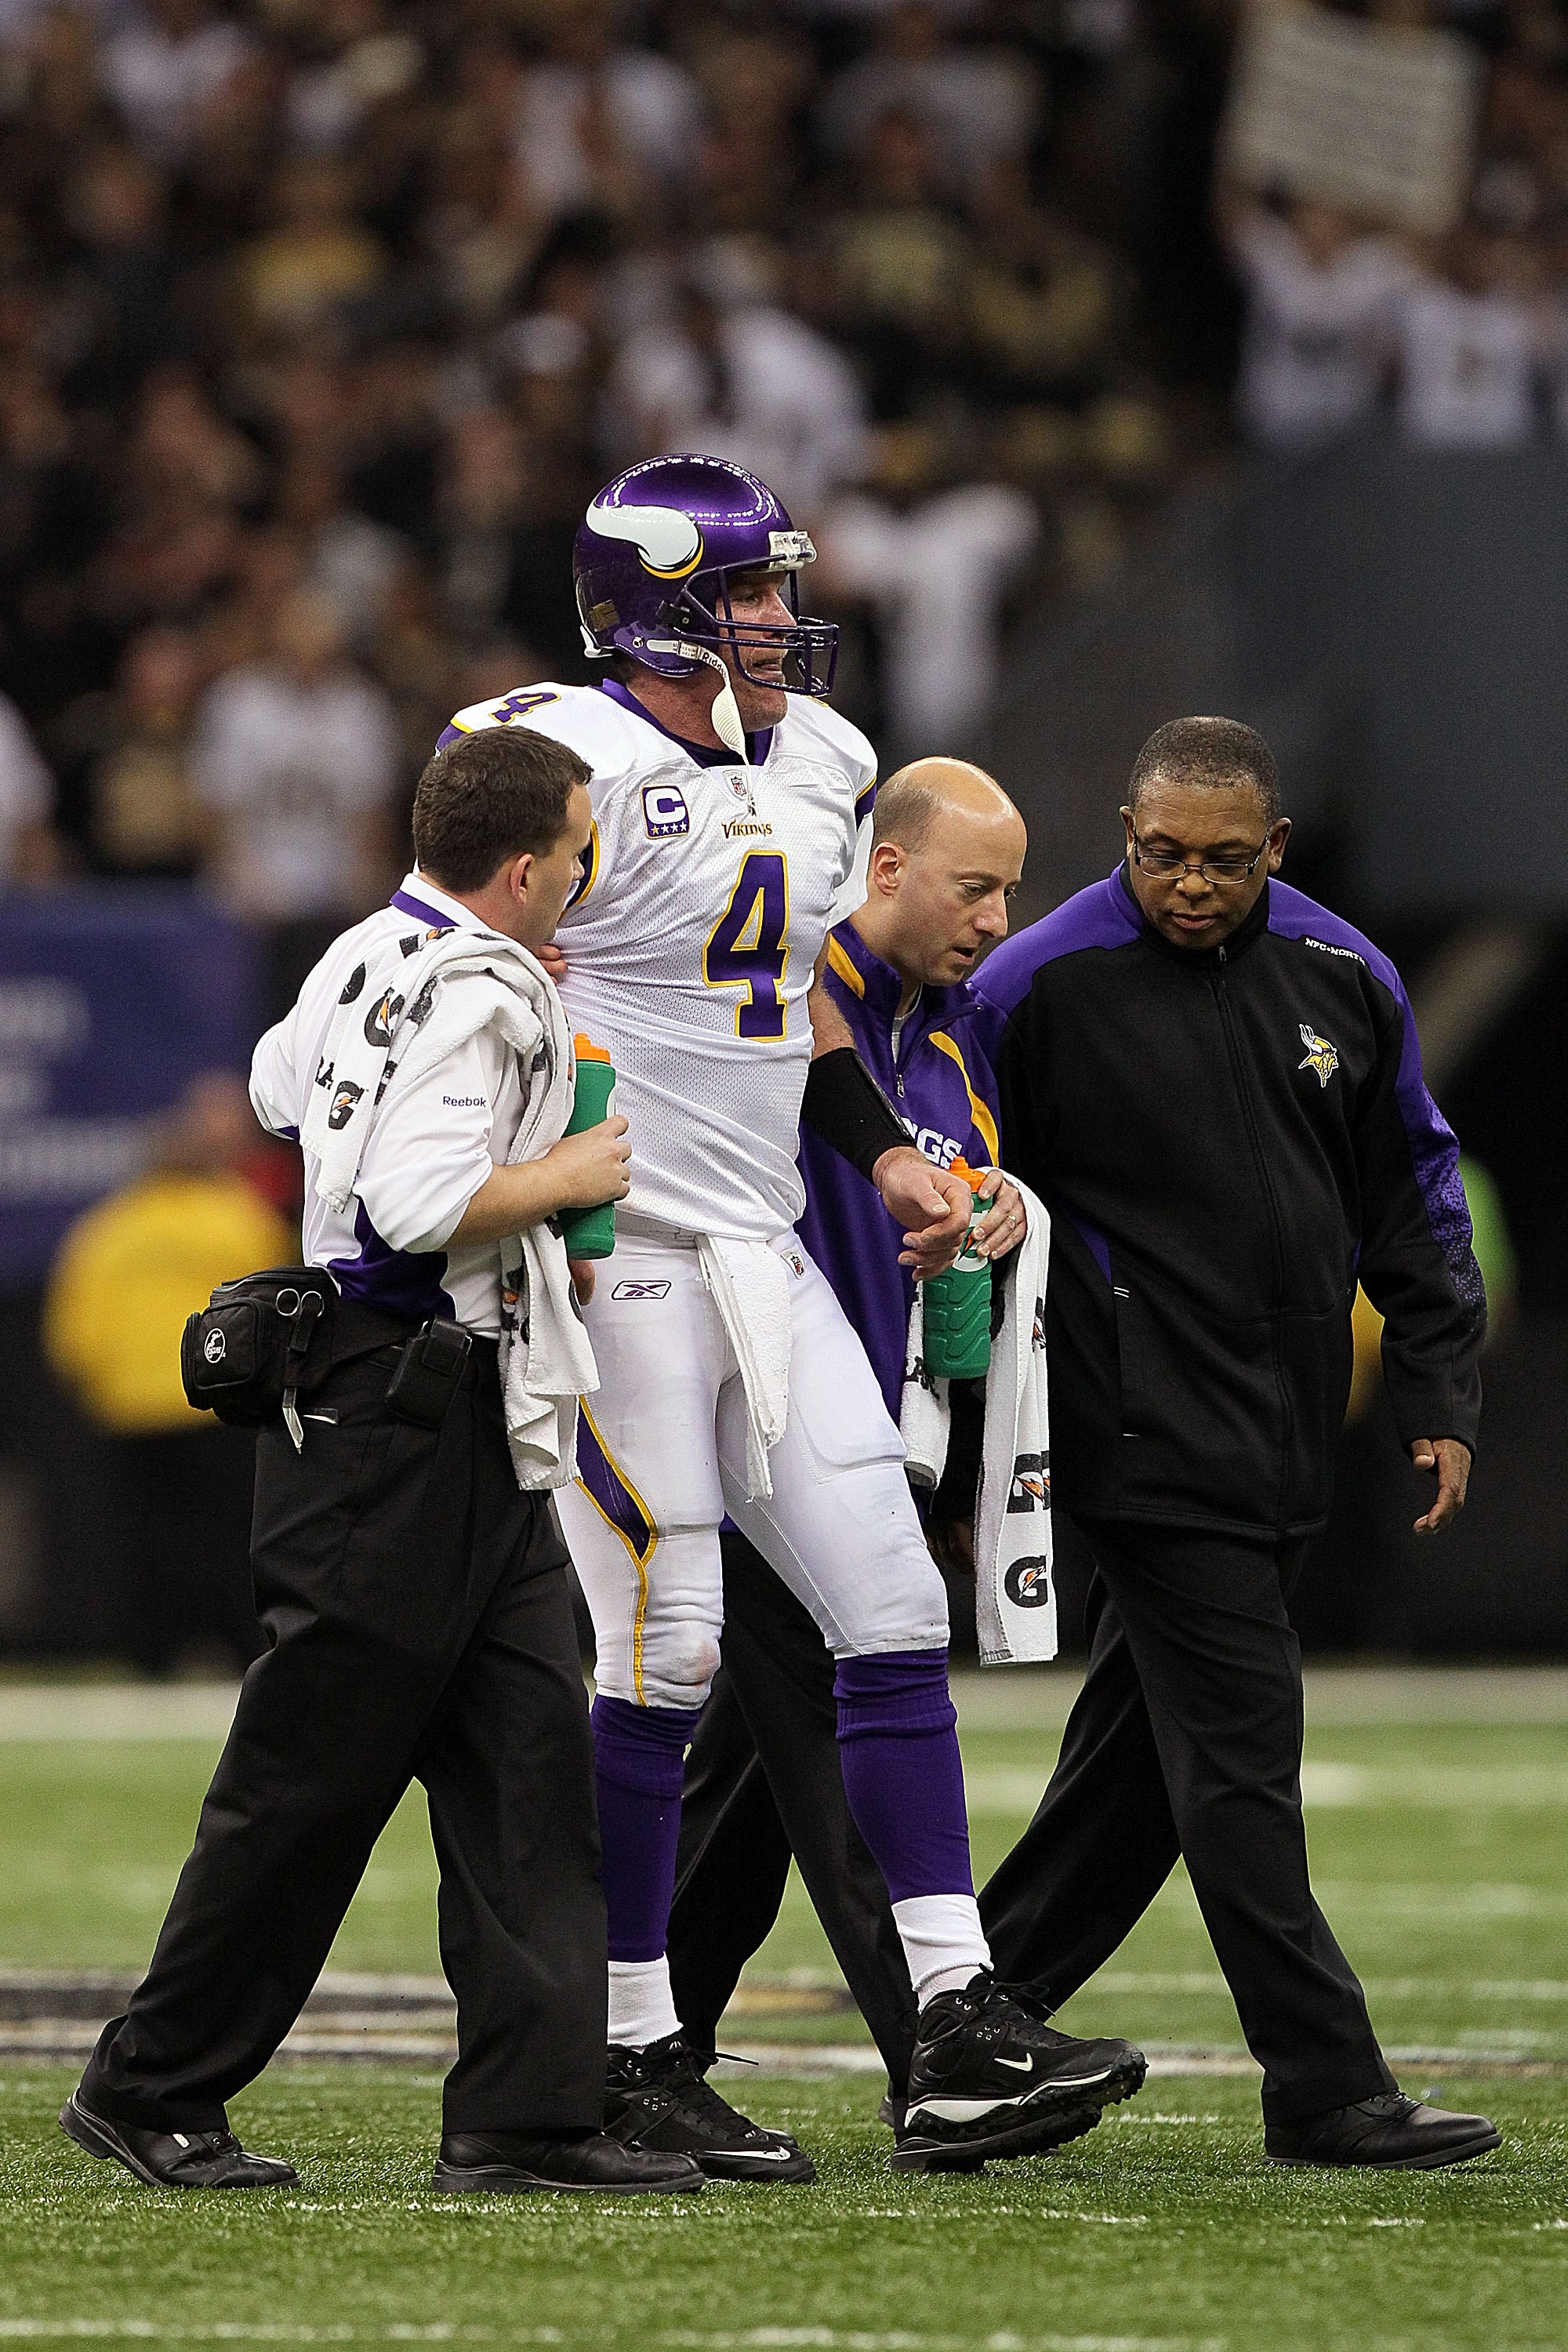 NEW ORLEANS - JANUARY 24:  Brett Favre #4 of  the Minnesota Vikings is helped off the field by medical staff after getting injured on a play against the New Orleans Saints during the NFC Championship Game at the Louisiana Superdome on January 24, 2010 in